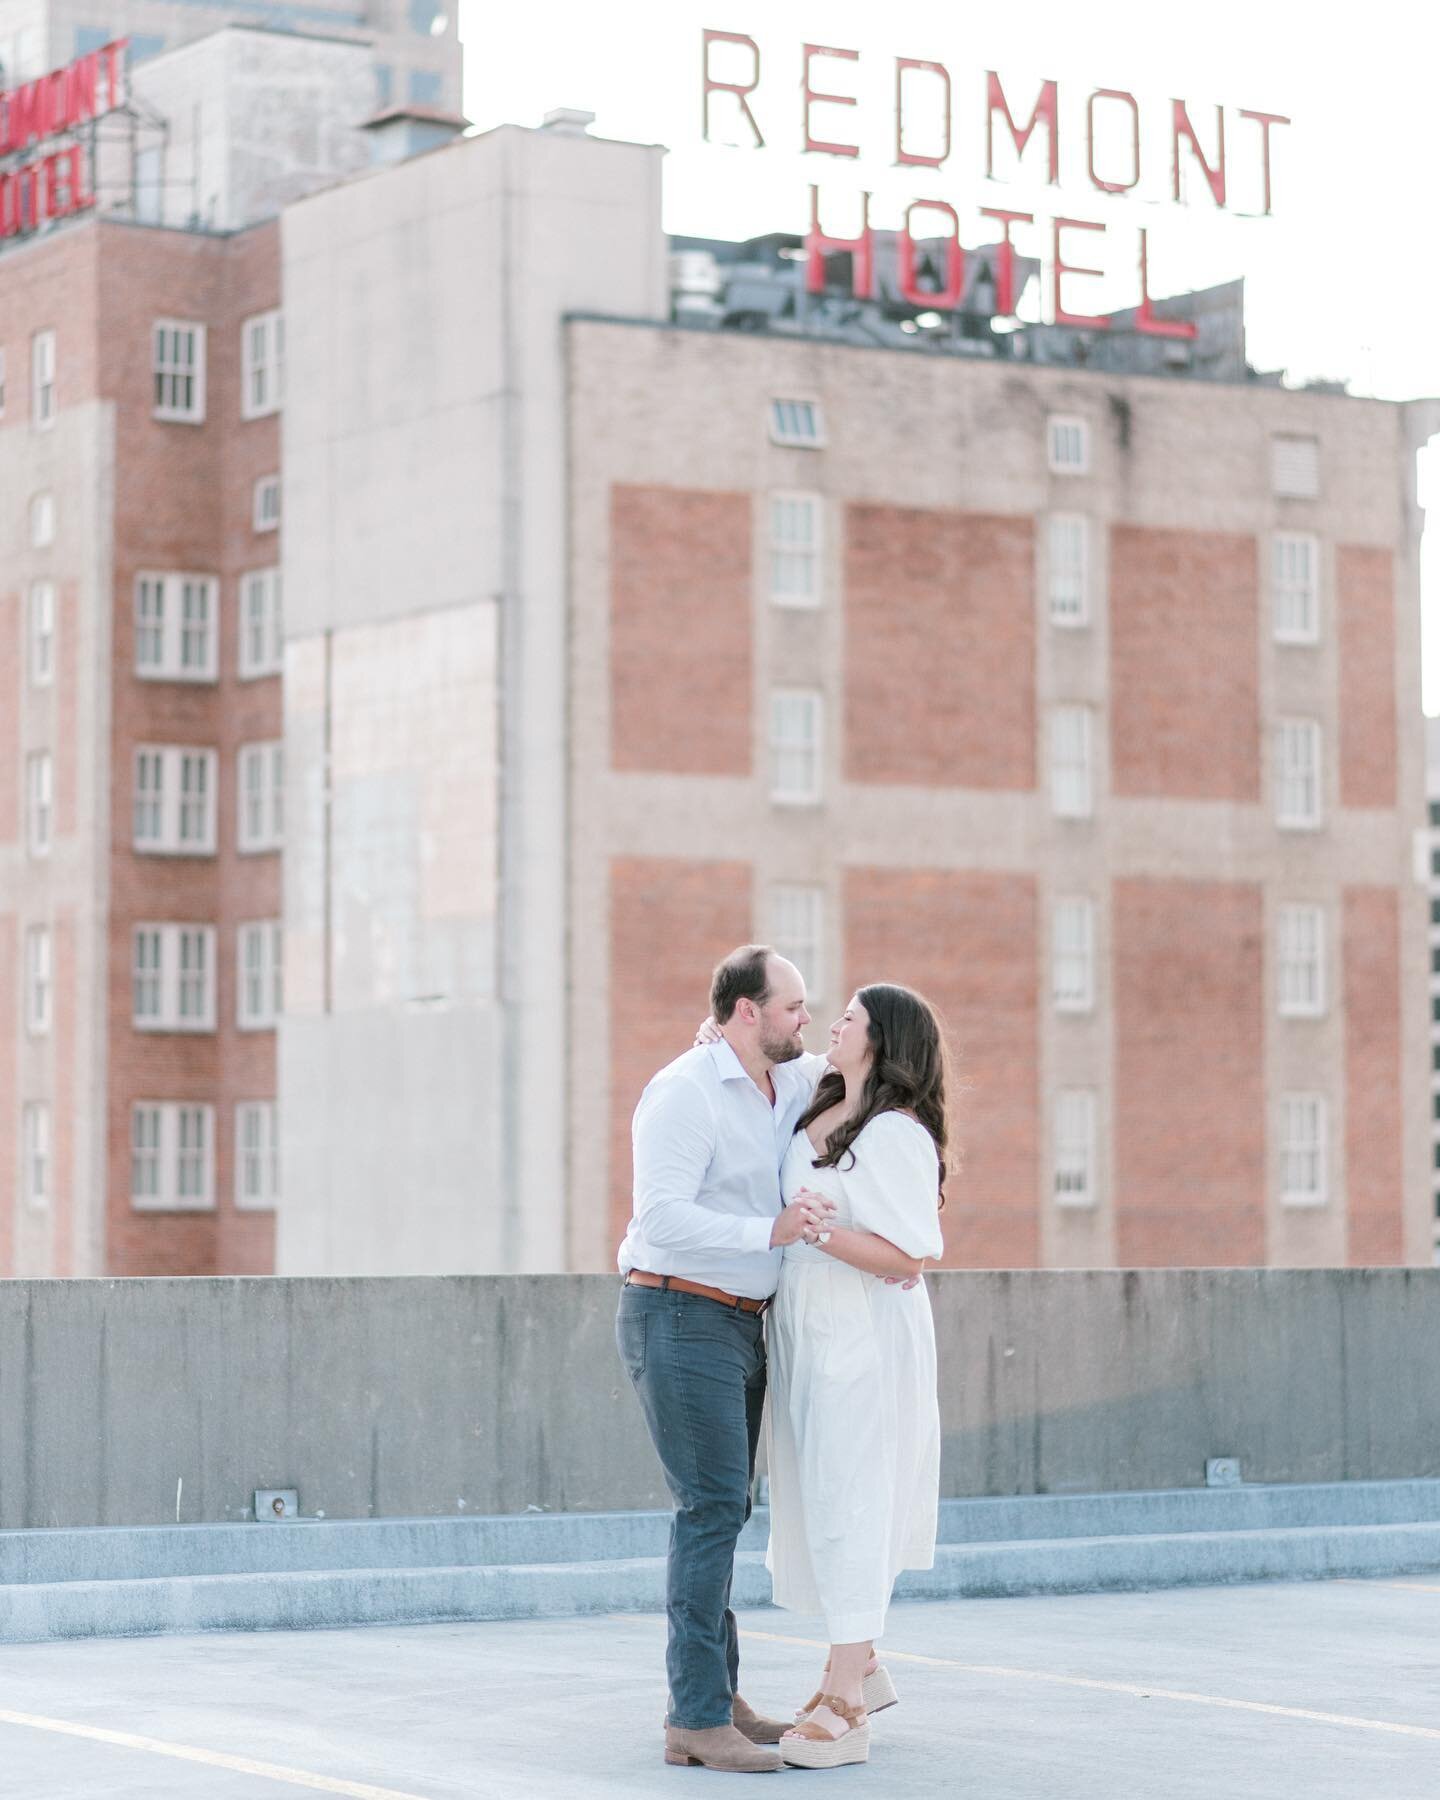 It was a dancing on rooftop parking decks kinda day 🪩We can&rsquo;t wait for Jessica &amp; Sean&rsquo;s wedding next April!!!!